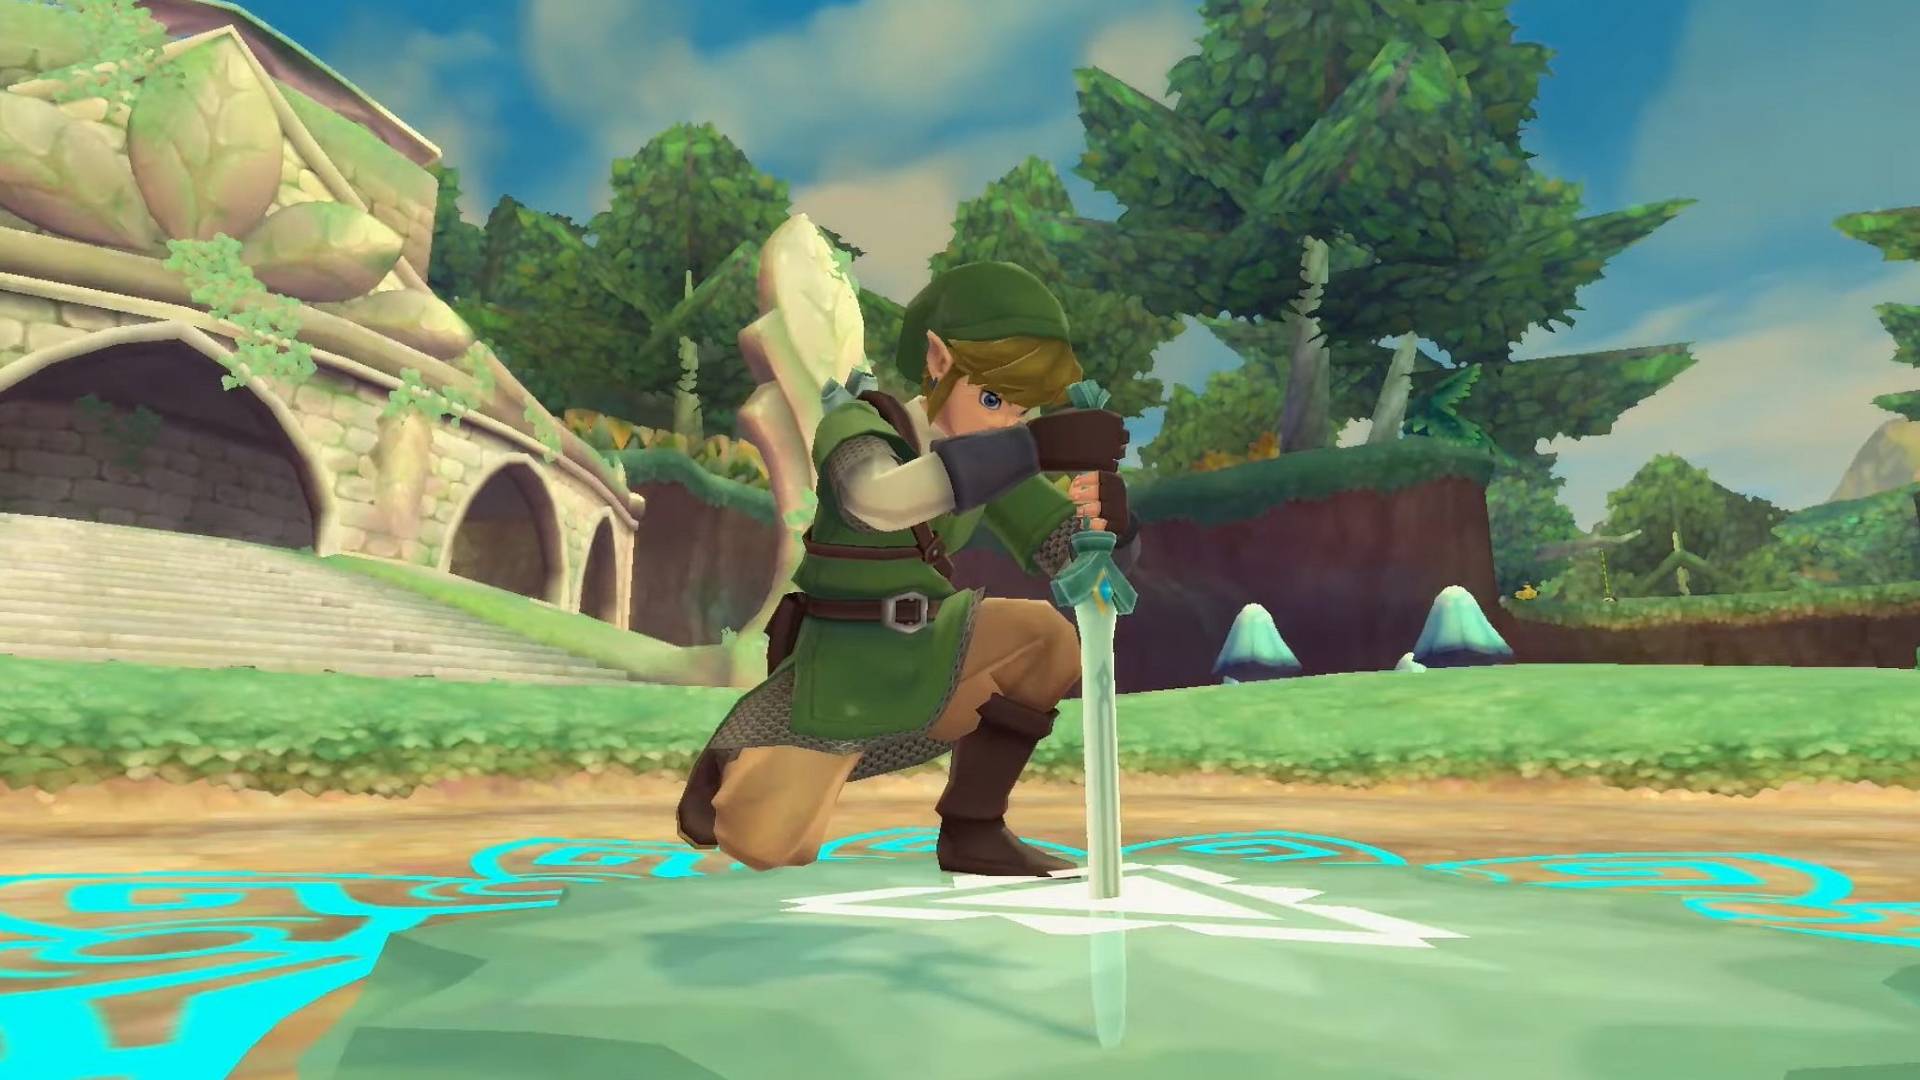 Link kneels one on knee and plunges his sword into the ground